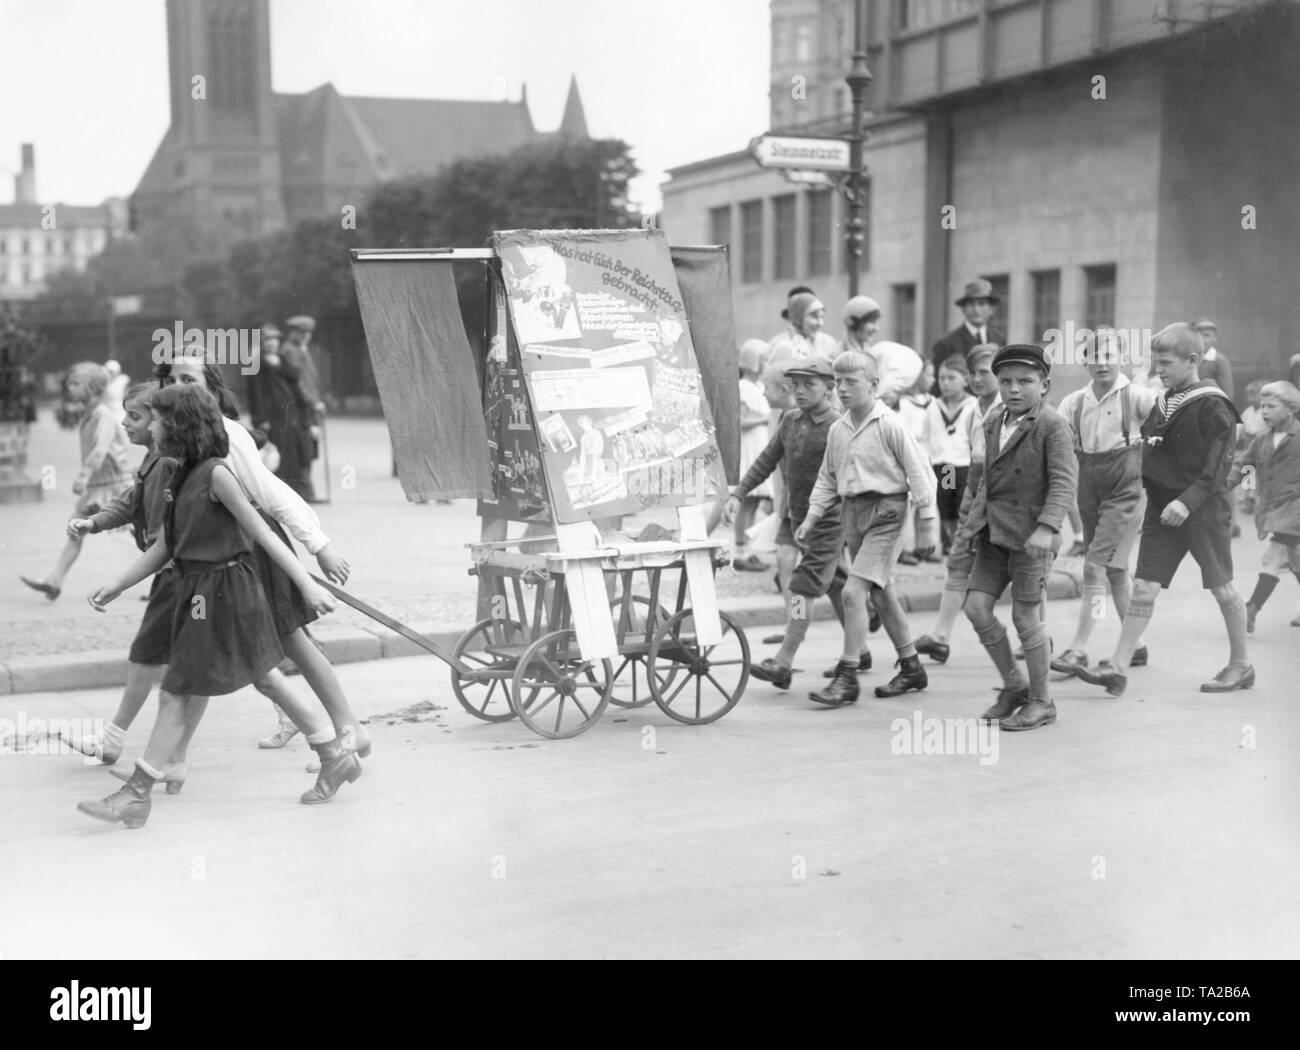 Children pull a small cart with posters and banners of the KPD (German Communist Party). On a poster are the sentences 'What brought you the Reichstag.' and 'For a Soviet Germany'. Stock Photo